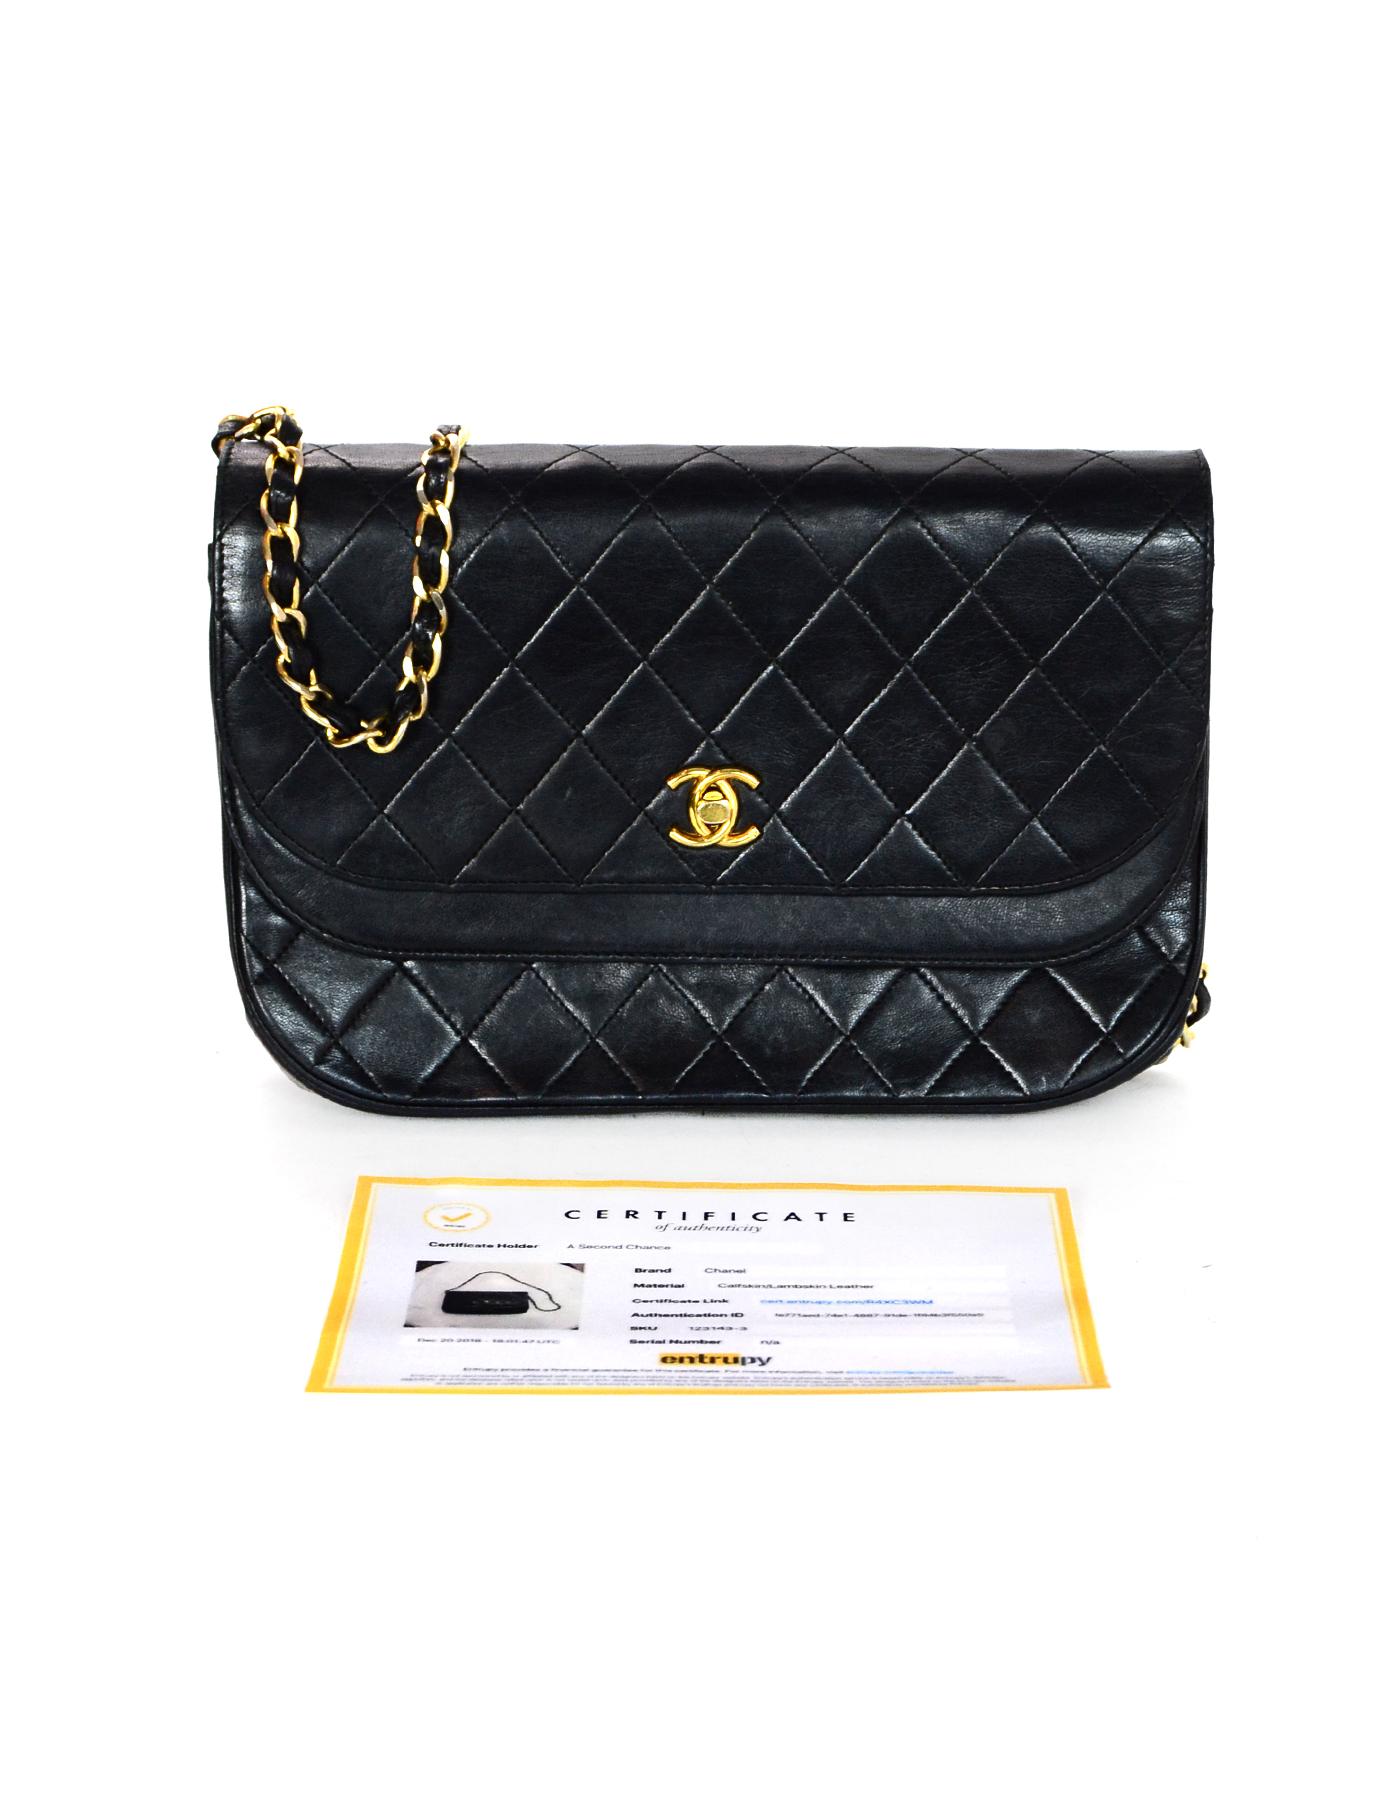 Chanel Vintage Black Quilted Lambskin Leather Flap Bag 8